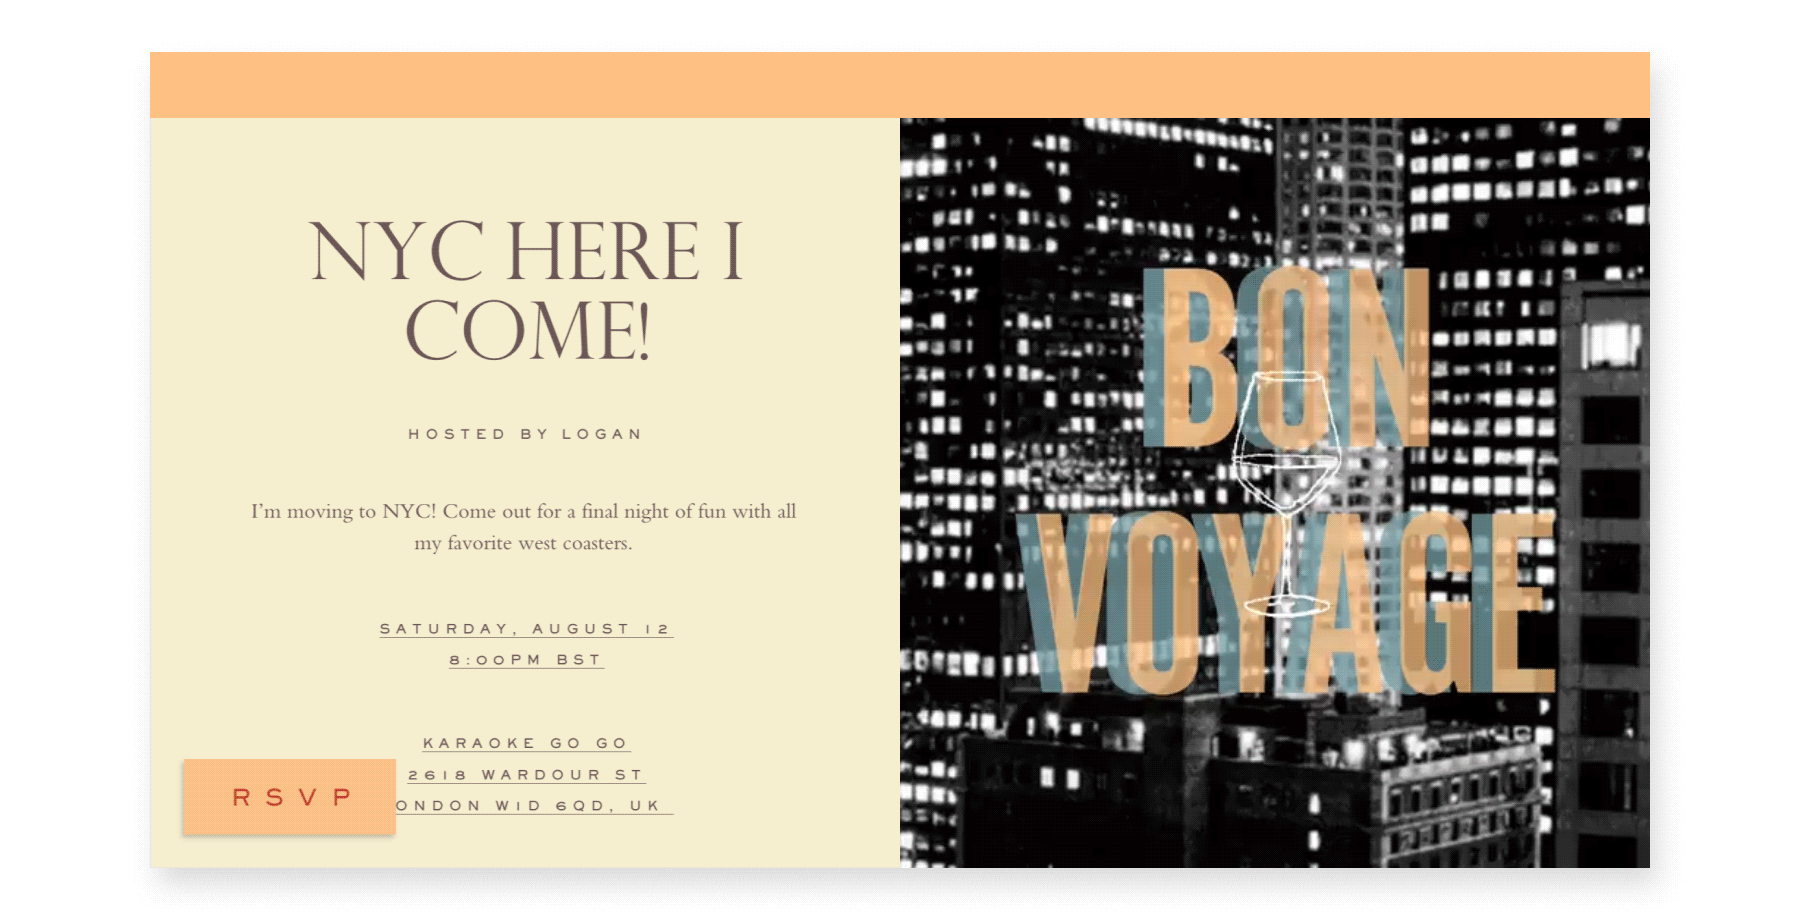 An online invite reads “NYC here I come!” with a black and white GIF of skyscraper buildings with window lights blinking and the words “Bon Voyage” imposed on top.